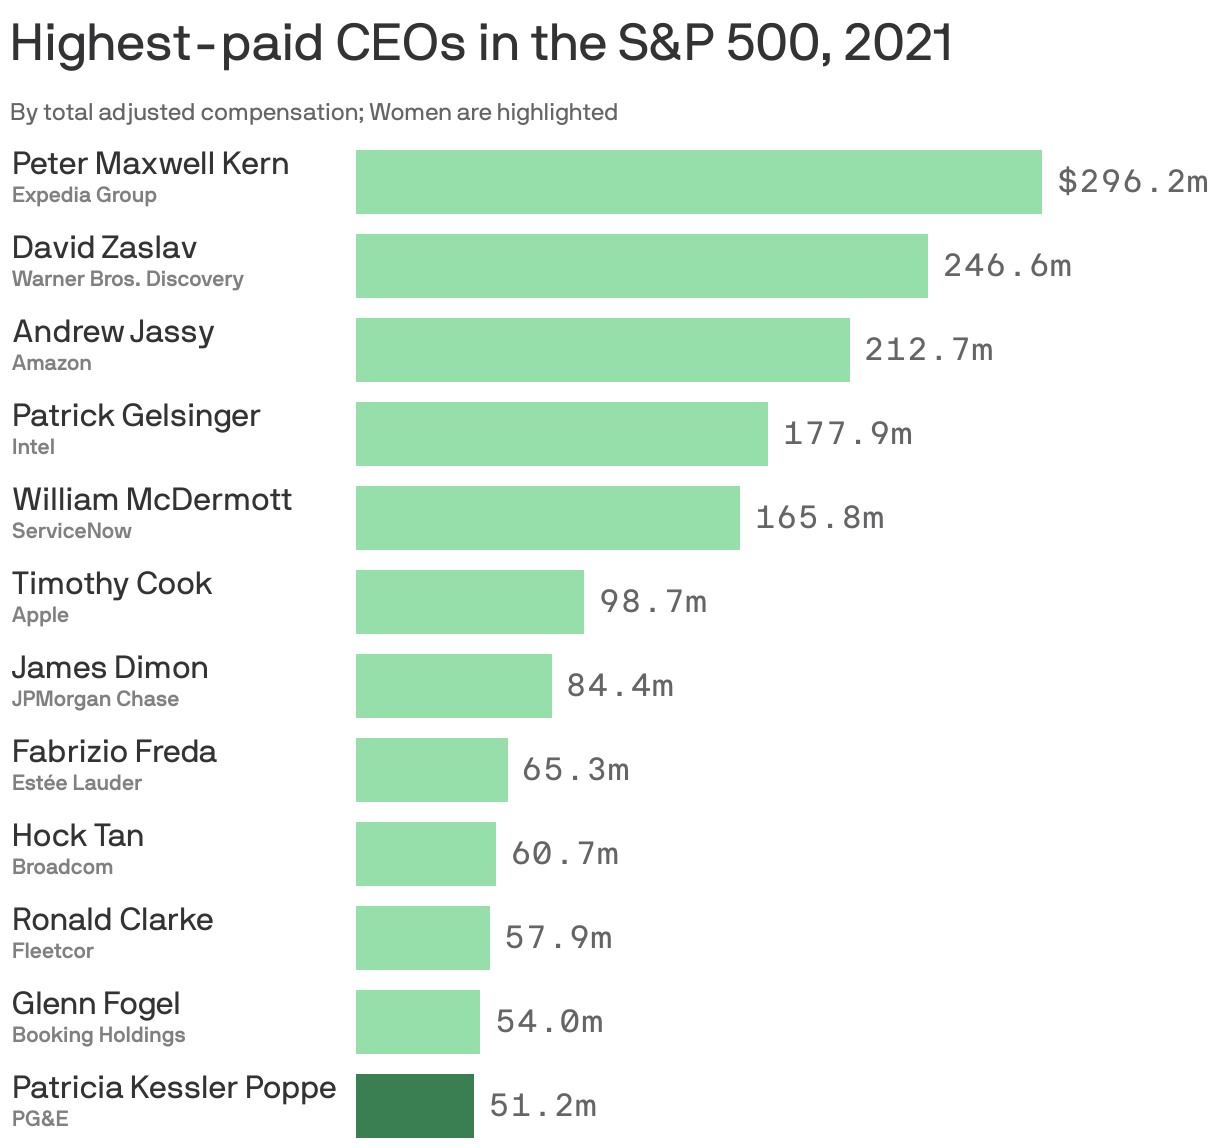 Highest-paid CEOs in the S&P 500, 2021